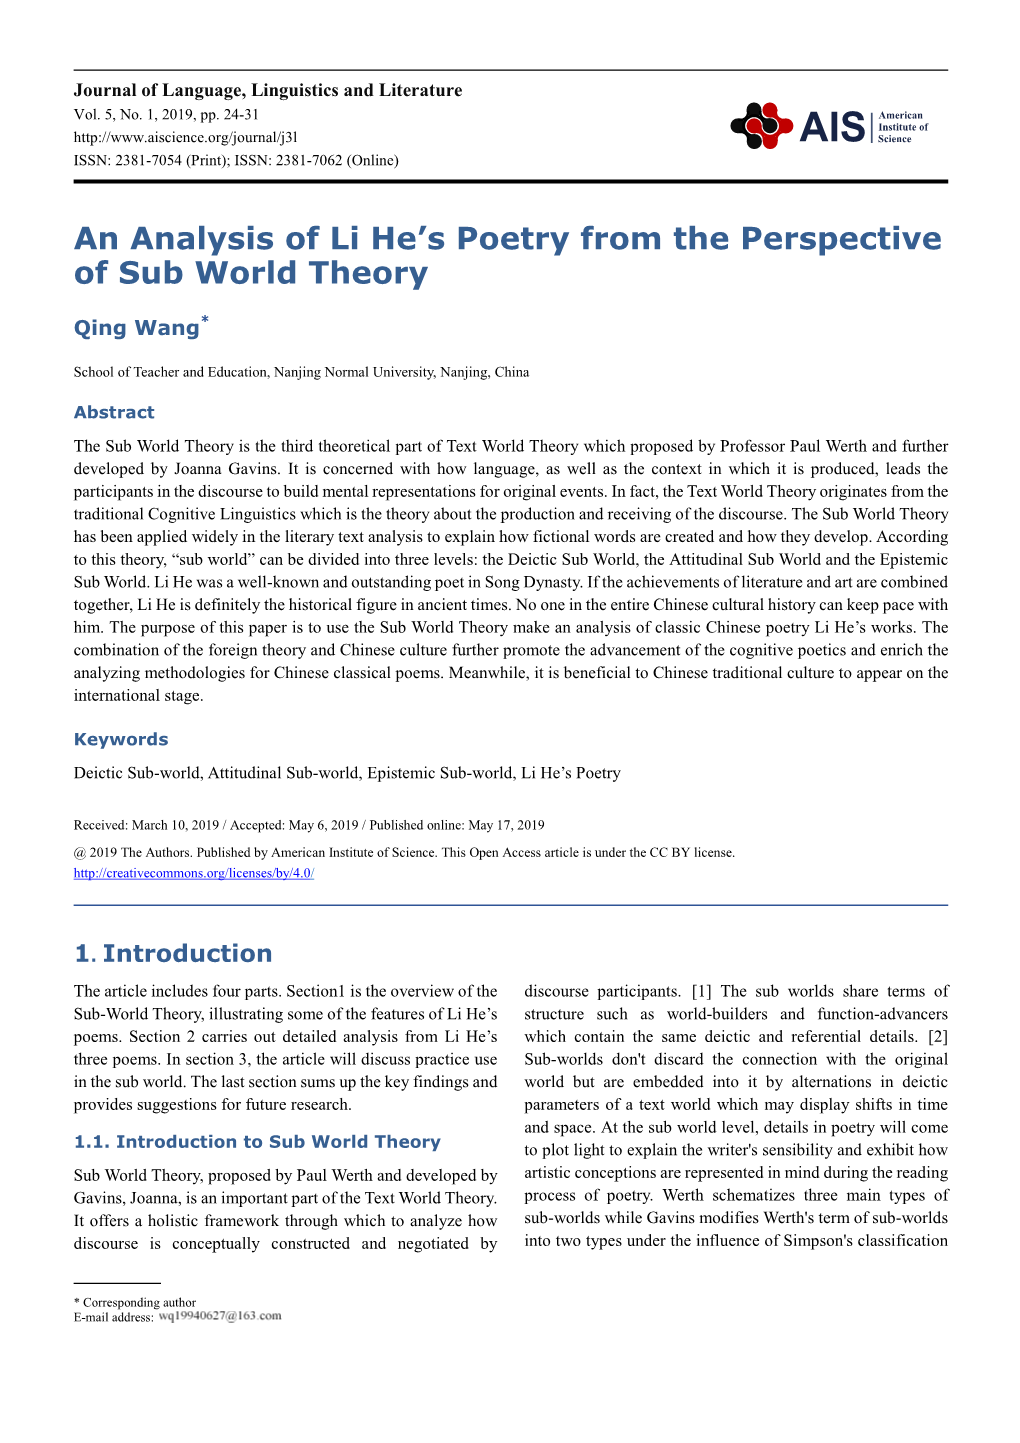 An Analysis of Li He's Poetry from the Perspective of Sub World Theory